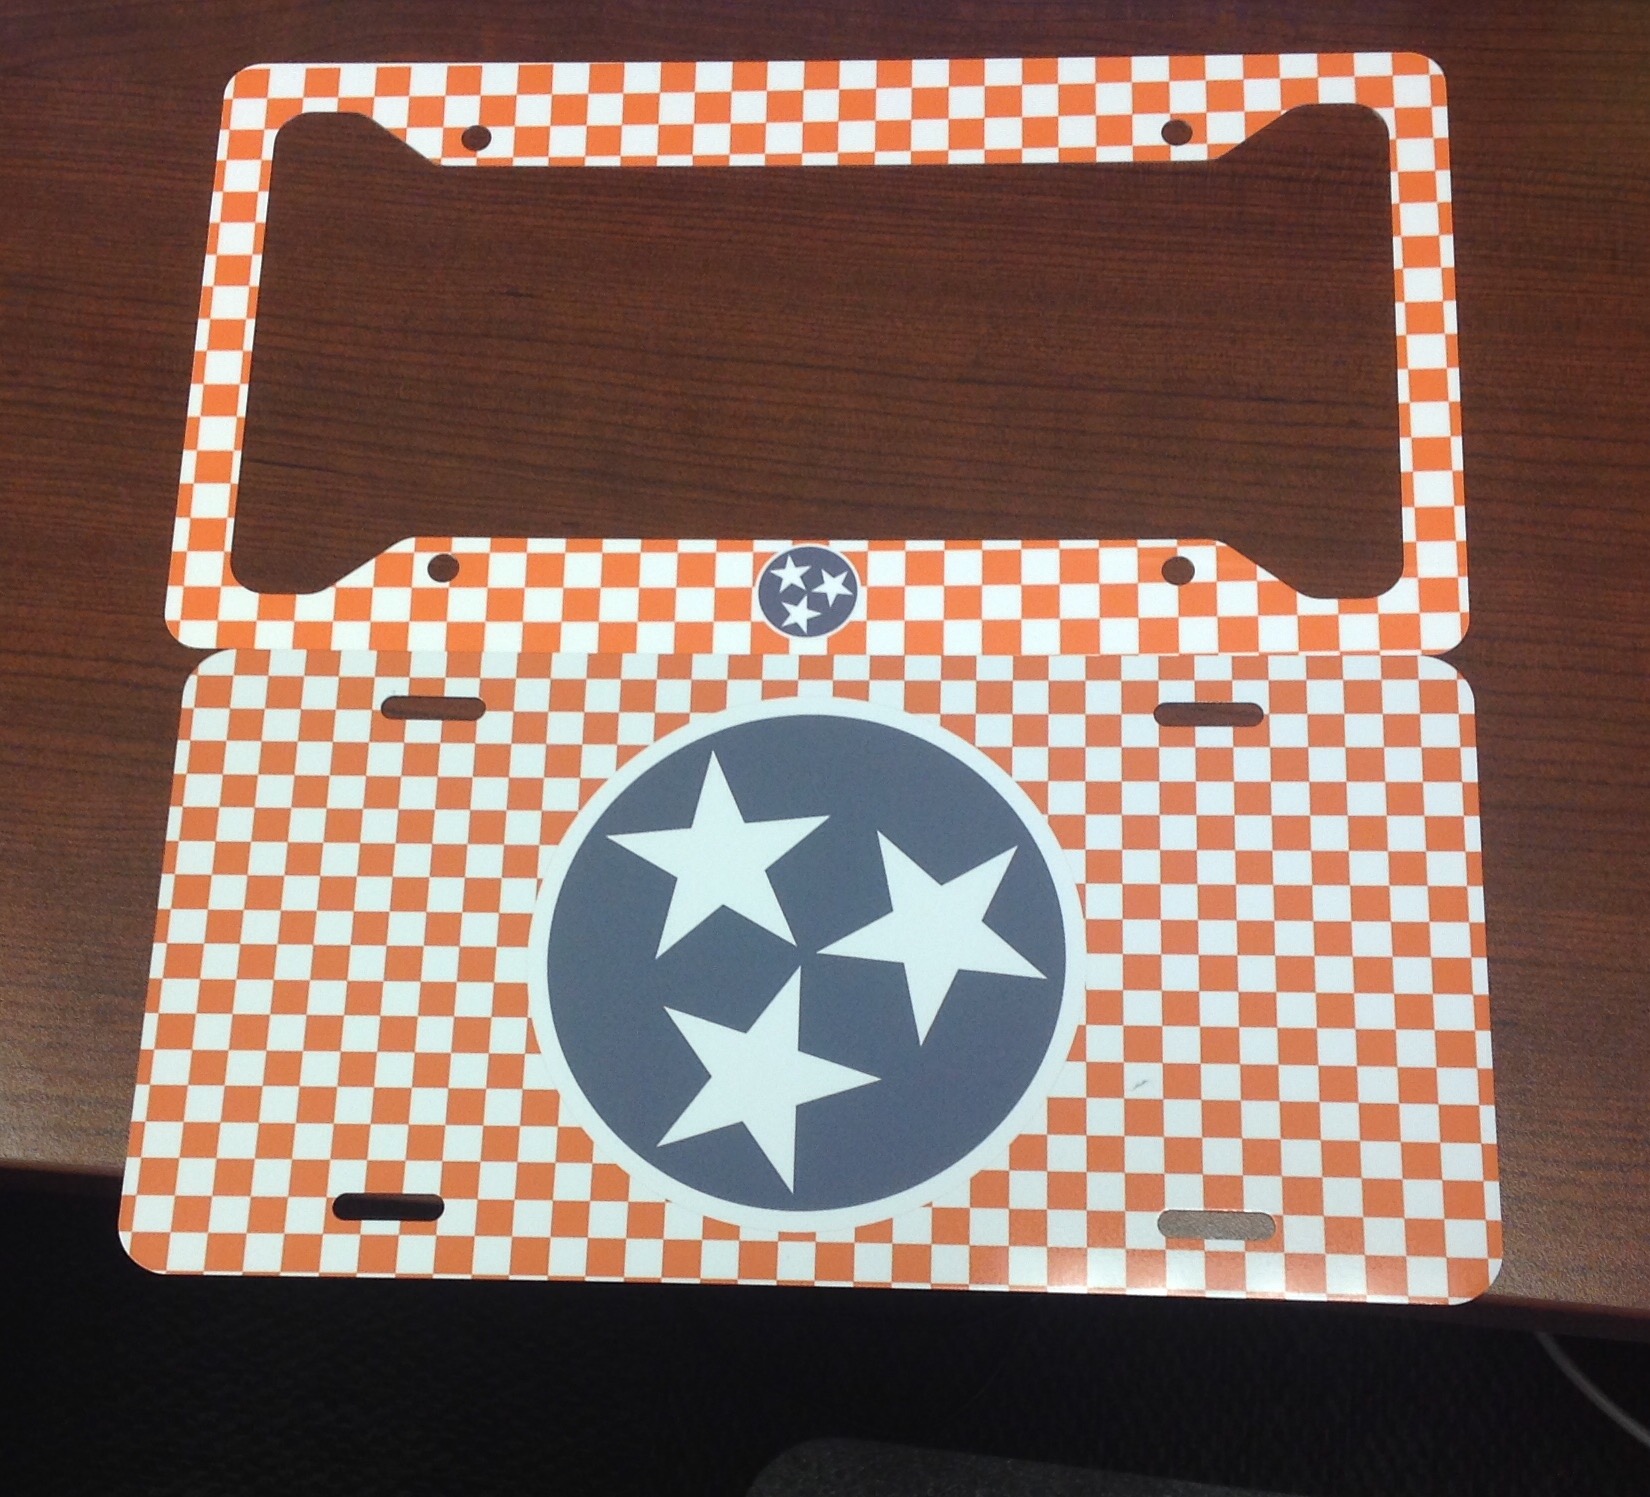 FOOTBALL TIME IN TENNESSEE made with sublimation printing